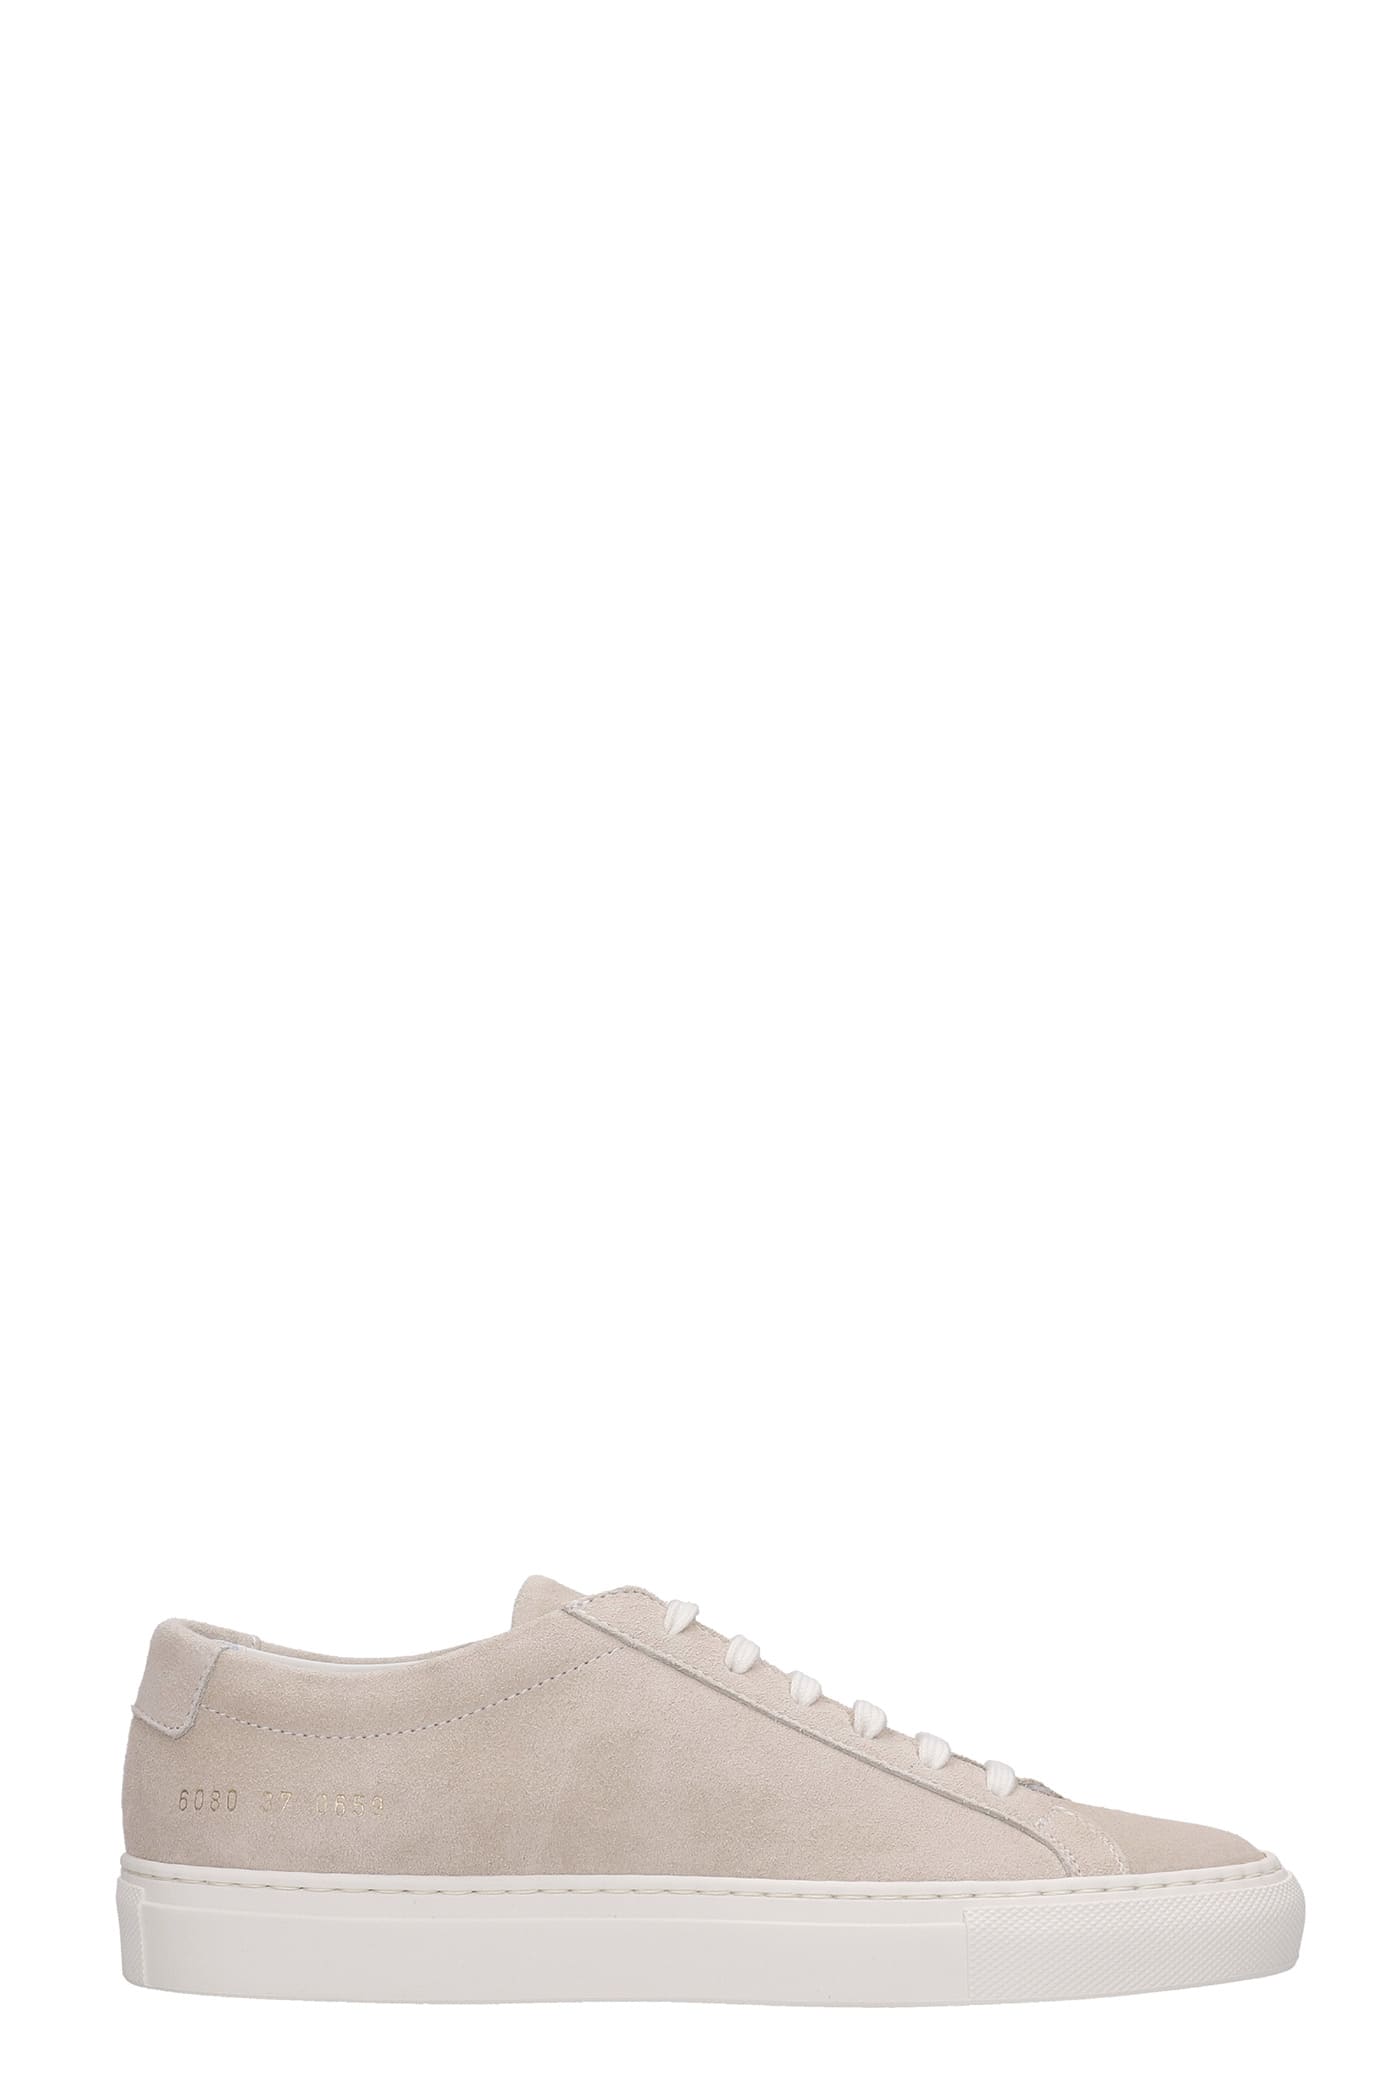 Common Projects Achille Sneakers In Powder Suede